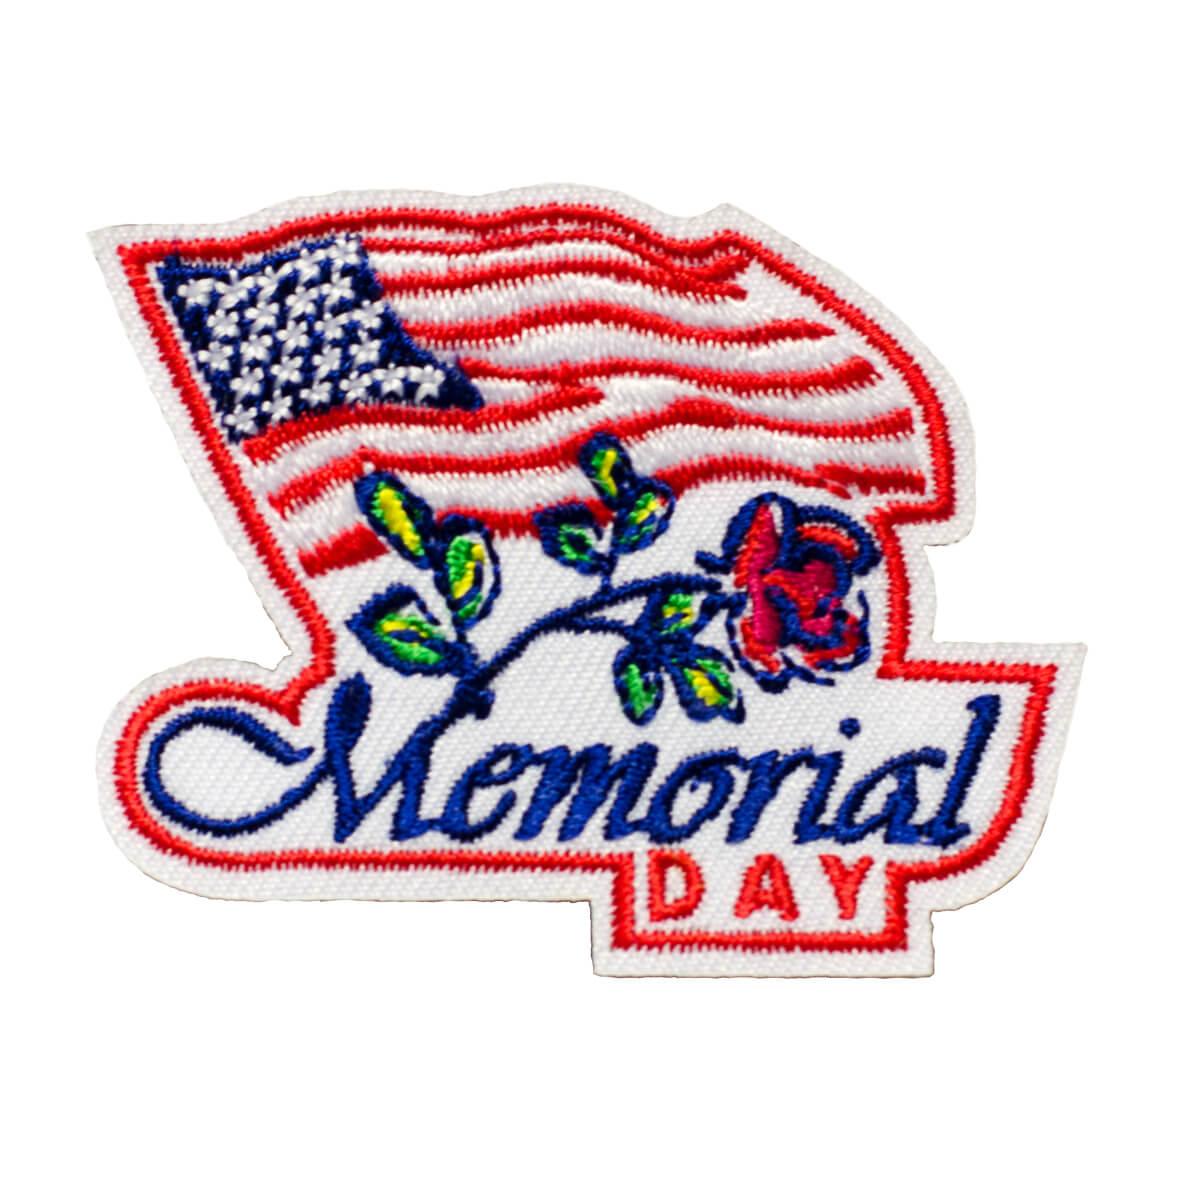 Girl Boy Cub 2020 MEMORIAL DAY Parade Celebration Patches Badges SCOUTS GUIDES